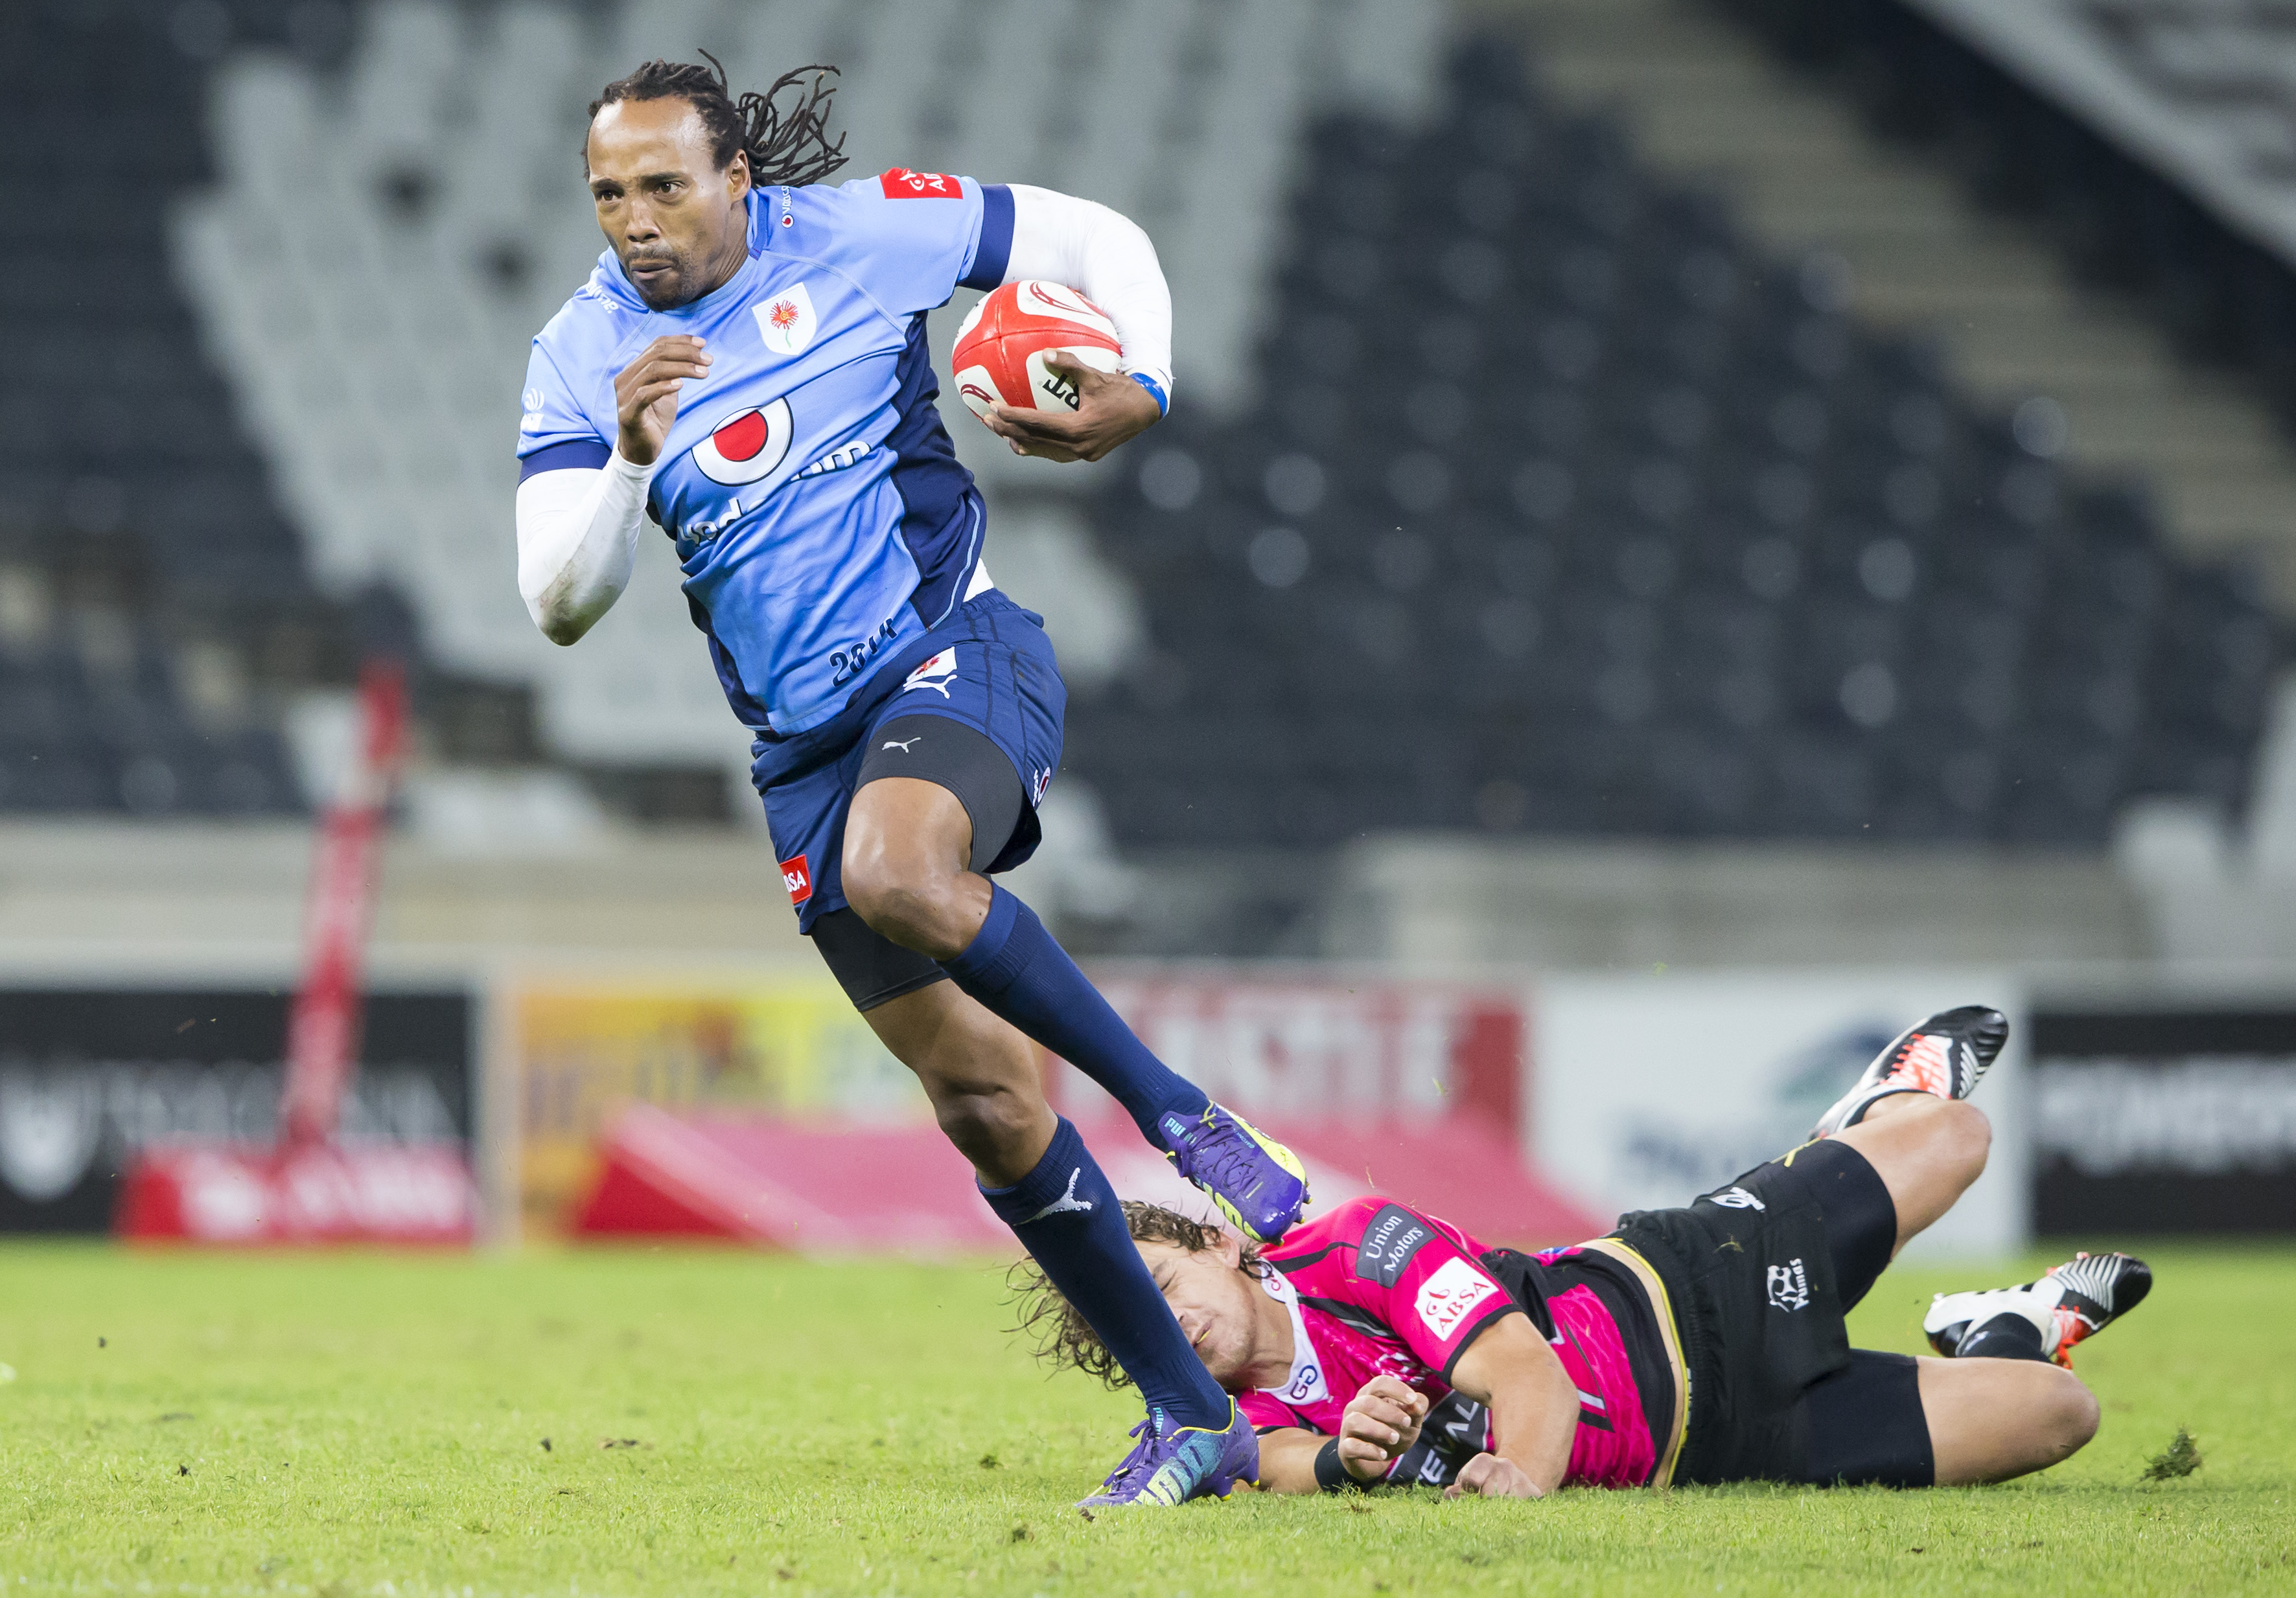 NELSPRUIT, SOUTH AFRICA - OCTOBER 03: Akona Ndungane of the Blue Bulls and Stefan Watermeyer of the Steval Pumas during the Absa Currie Cup match between Steval Pumas and Vodacom Blue Bulls at Mbombela Stadium on October 03, 2014 in Nelspruit, South Africa. (Photo by Dirk Kotze/Gallo Images)